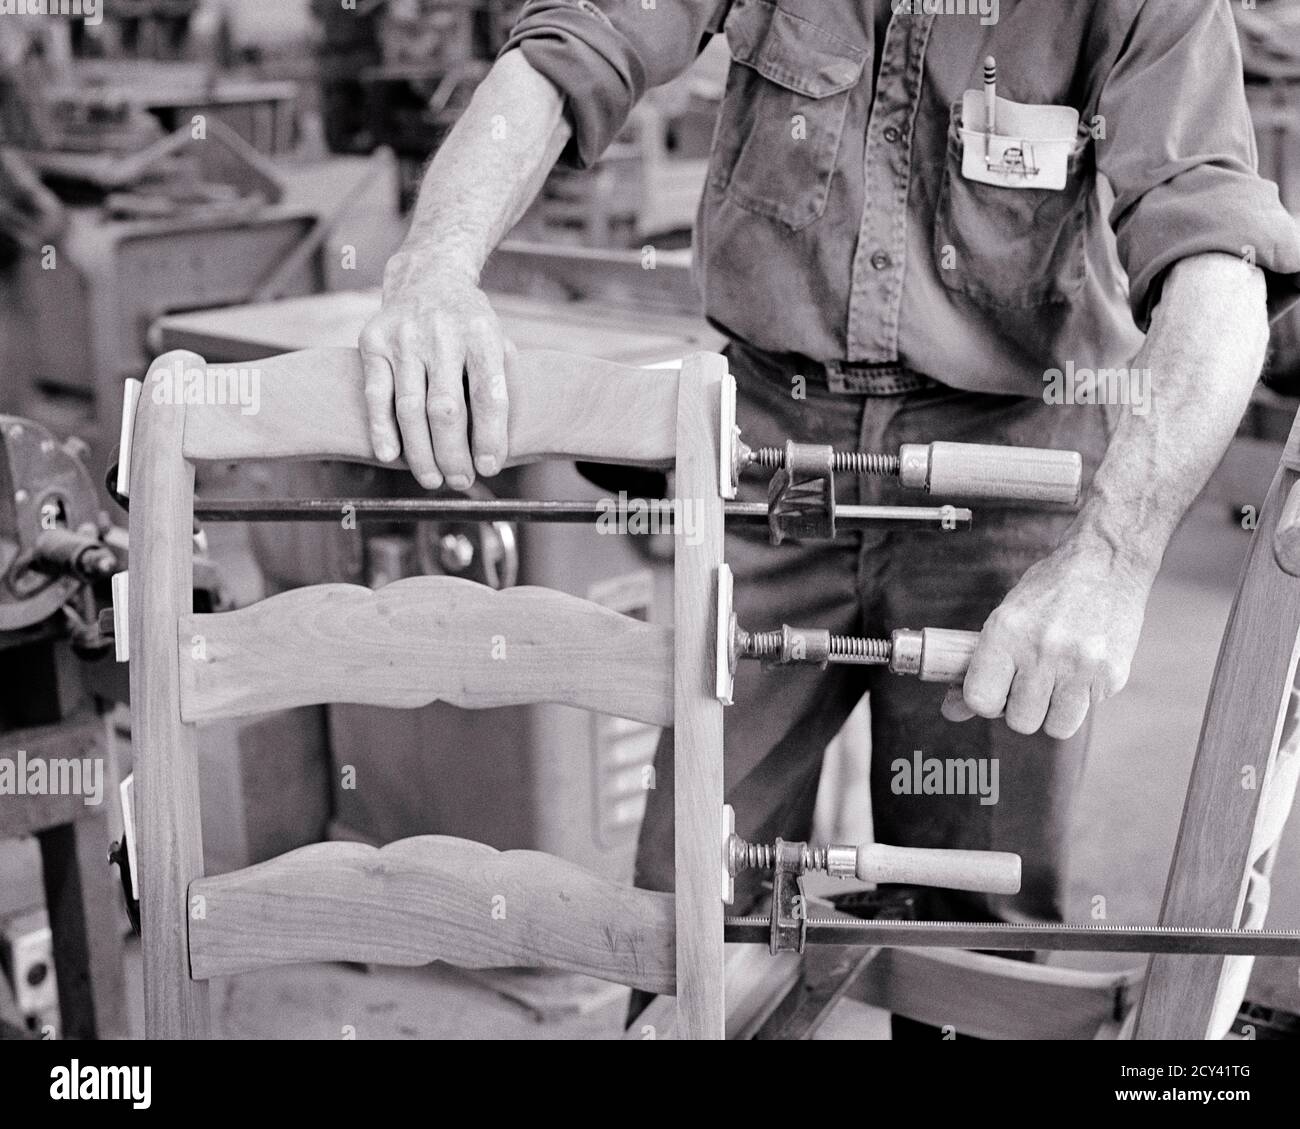 1960s MAN CRAFTSMAN HANDS BUILDING MAKING REFINISHING FURNITURE USING WOODWORKING SCREW TIGHTEN CLAMPS GLUING UP CHAIR BACK - i5560 HAR001 HARS SKILL OCCUPATION SKILLS STRENGTH CUSTOMER SERVICE CAREERS KNOWLEDGE PROGRESS LABOR PRIDE UP EMPLOYMENT MANUFACTURING OCCUPATIONS USING REPAIRING CONCEPT CONCEPTUAL CLOSE-UP KIND EMPLOYEE SYMBOLIC WOODWORKING CLAMPS CONCEPTS CRAFTSMAN CREATIVITY GLUING MANUFACTURE MID-ADULT MID-ADULT MAN PRECISION REFINISHING SCREW BLACK AND WHITE CAUCASIAN ETHNICITY HANDS ONLY HAR001 LABORING OLD FASHIONED REPRESENTATION VISE Stock Photo